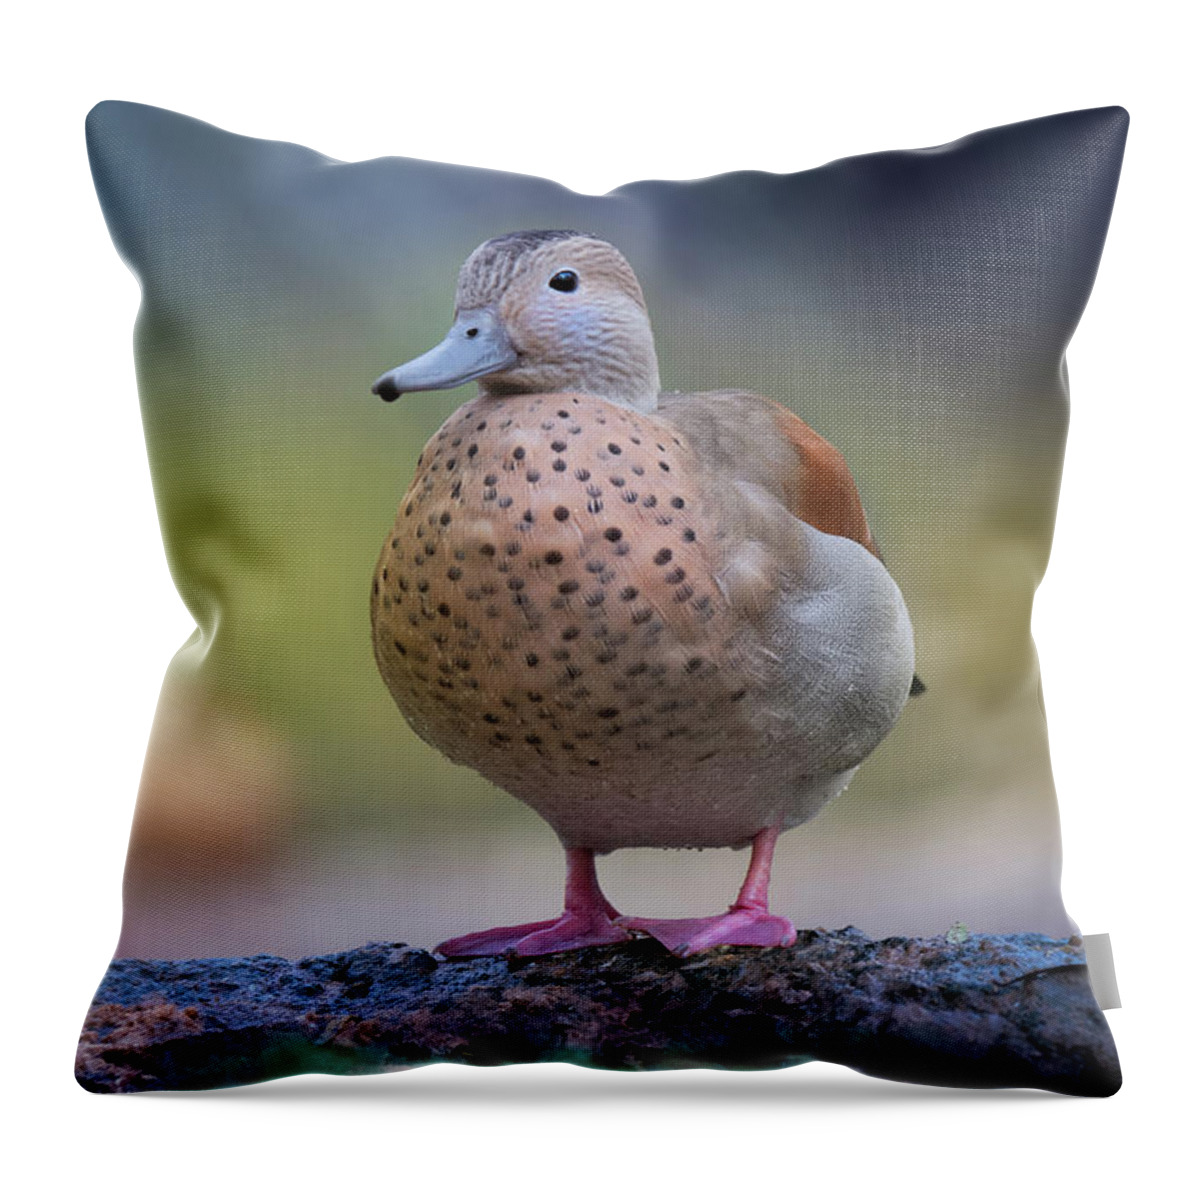 Photograph Throw Pillow featuring the photograph Seriously Cute by Cindy Lark Hartman